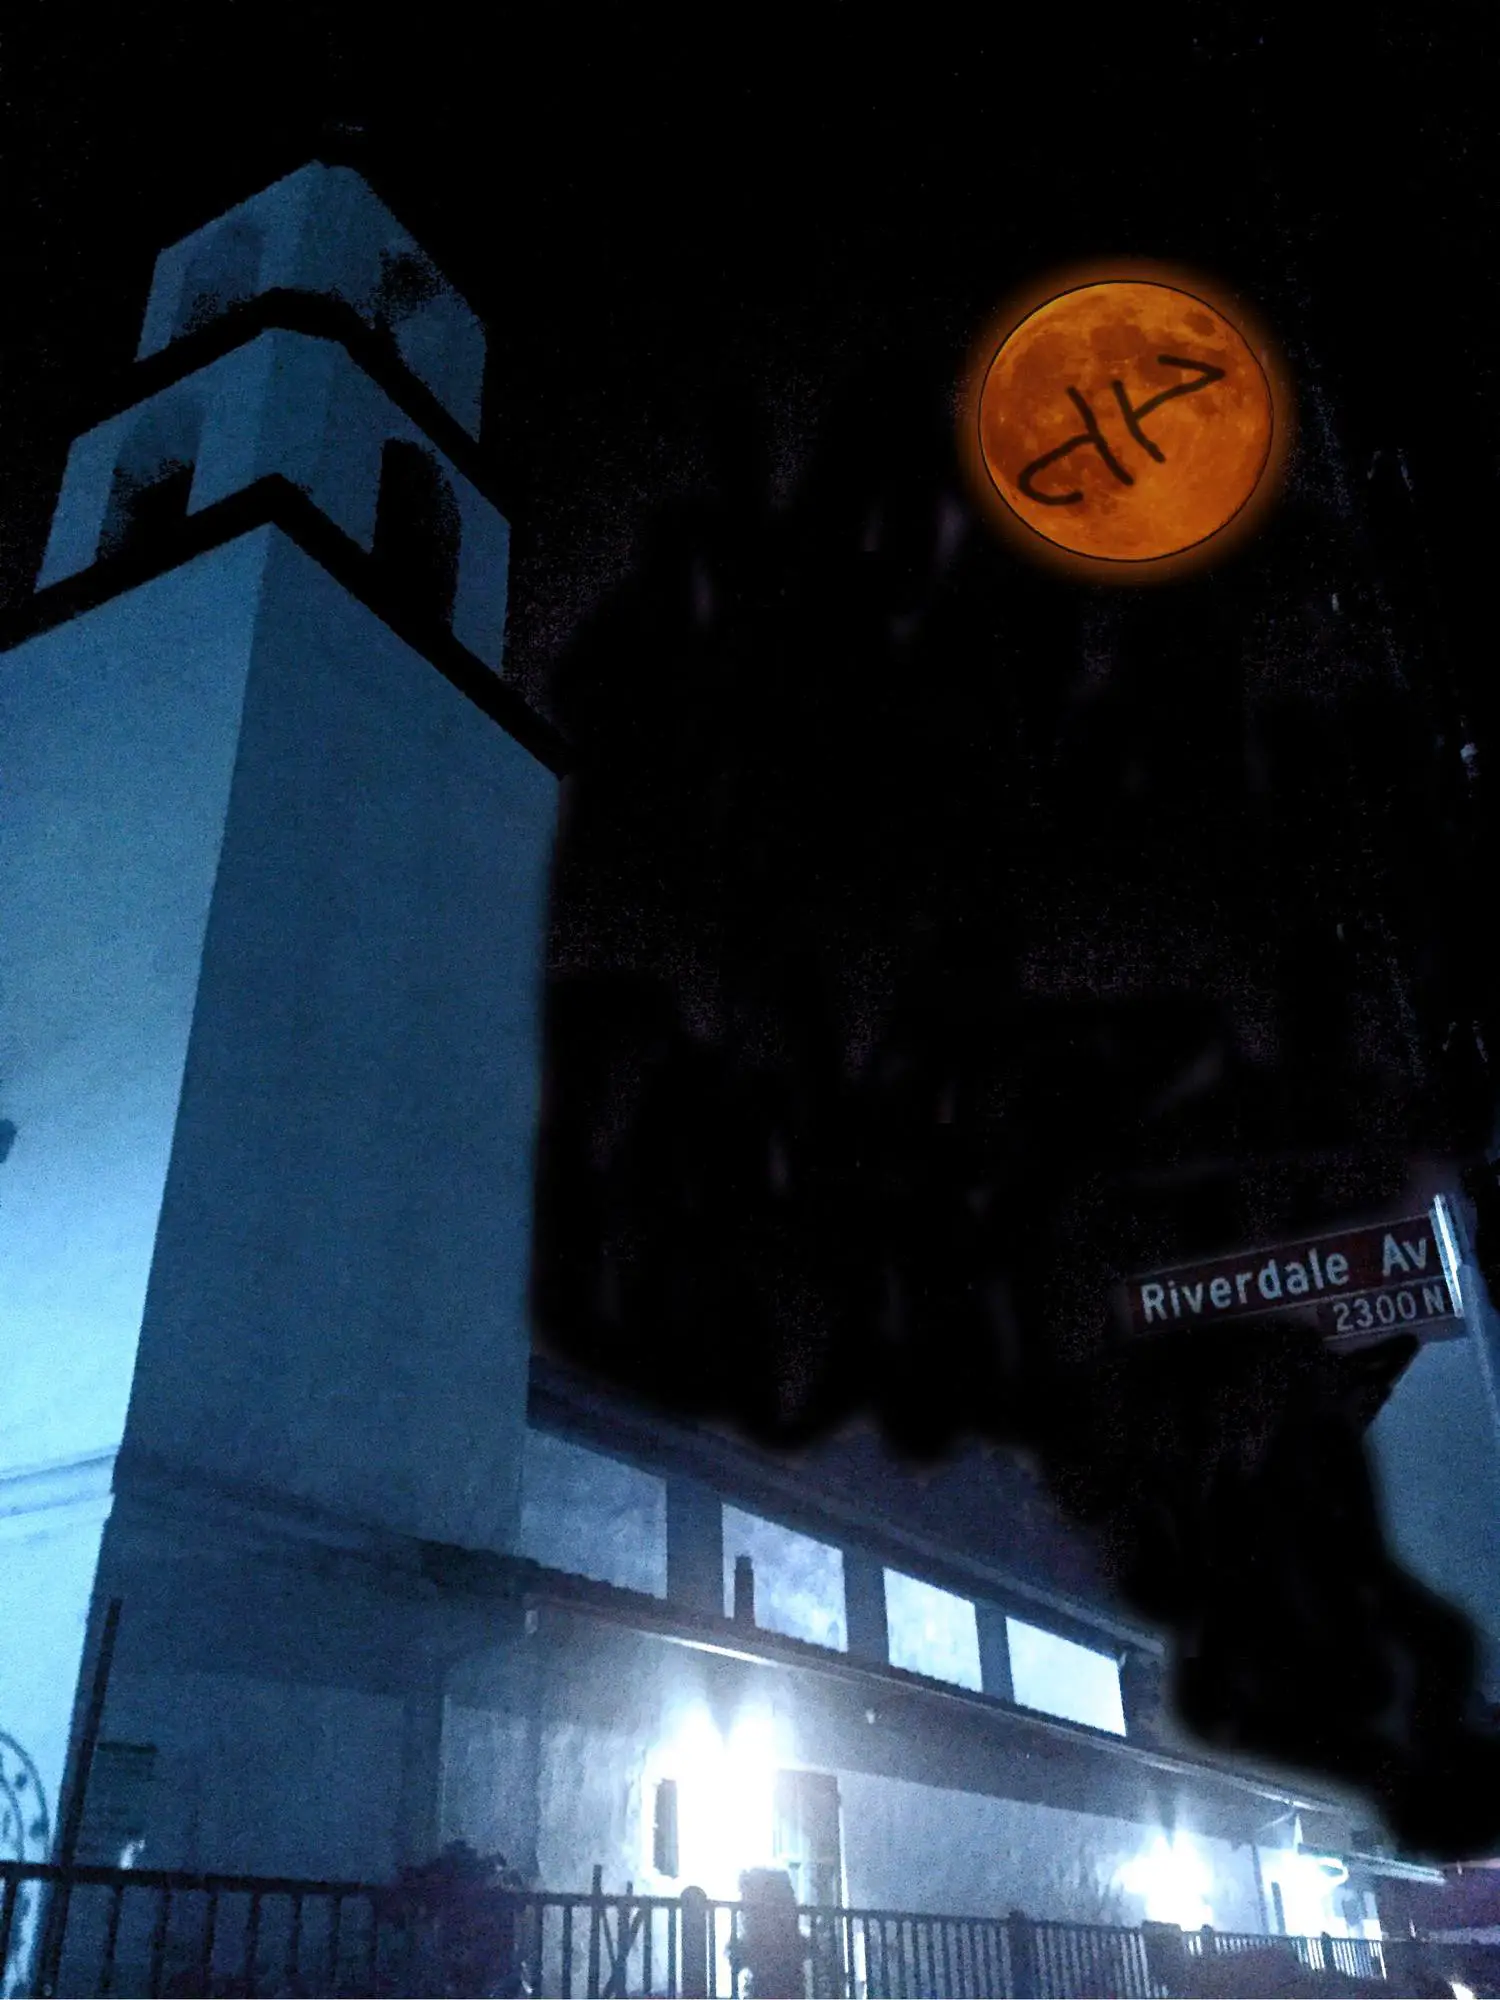 Harvest Moon - The Boanthropic The Society - Immersive Alternate Reality Game - Eric Hoff - Tad Shafer - Save The Moonchild